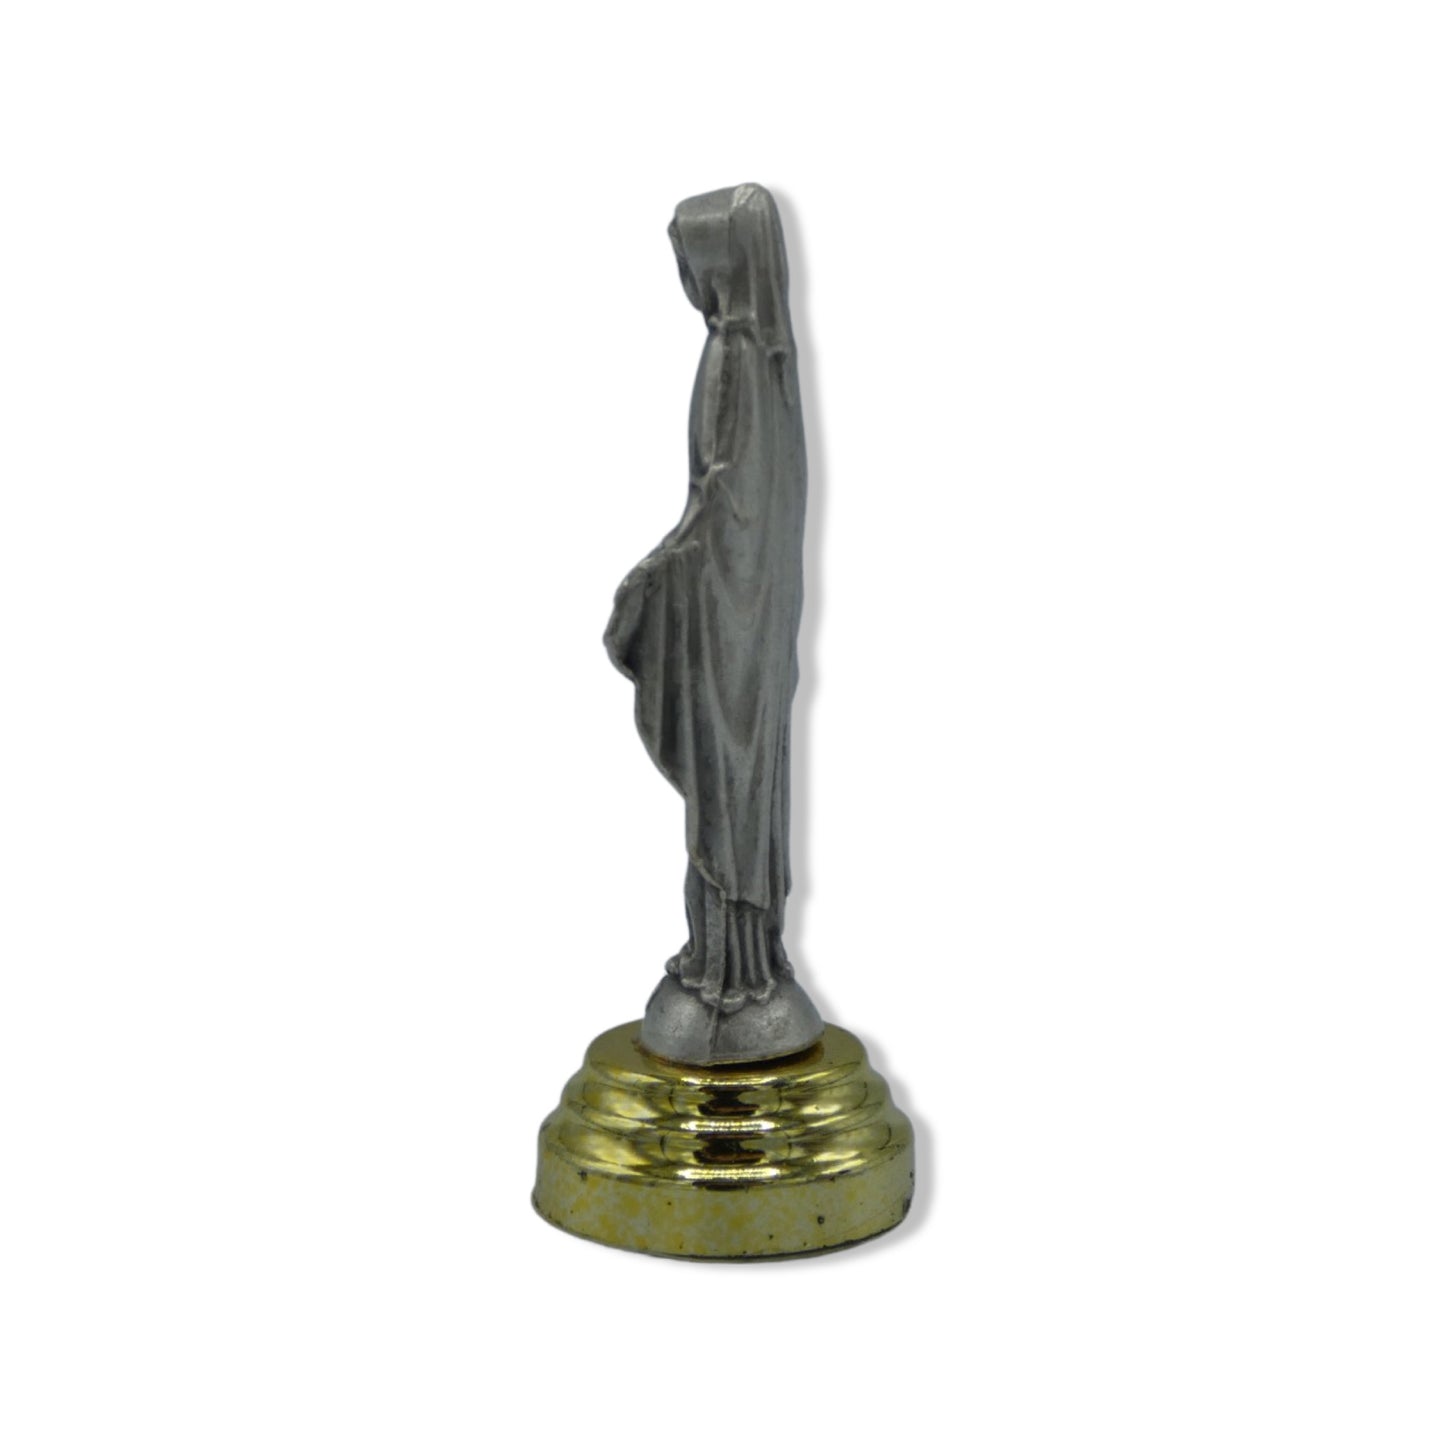 Miraculous Medal Statue